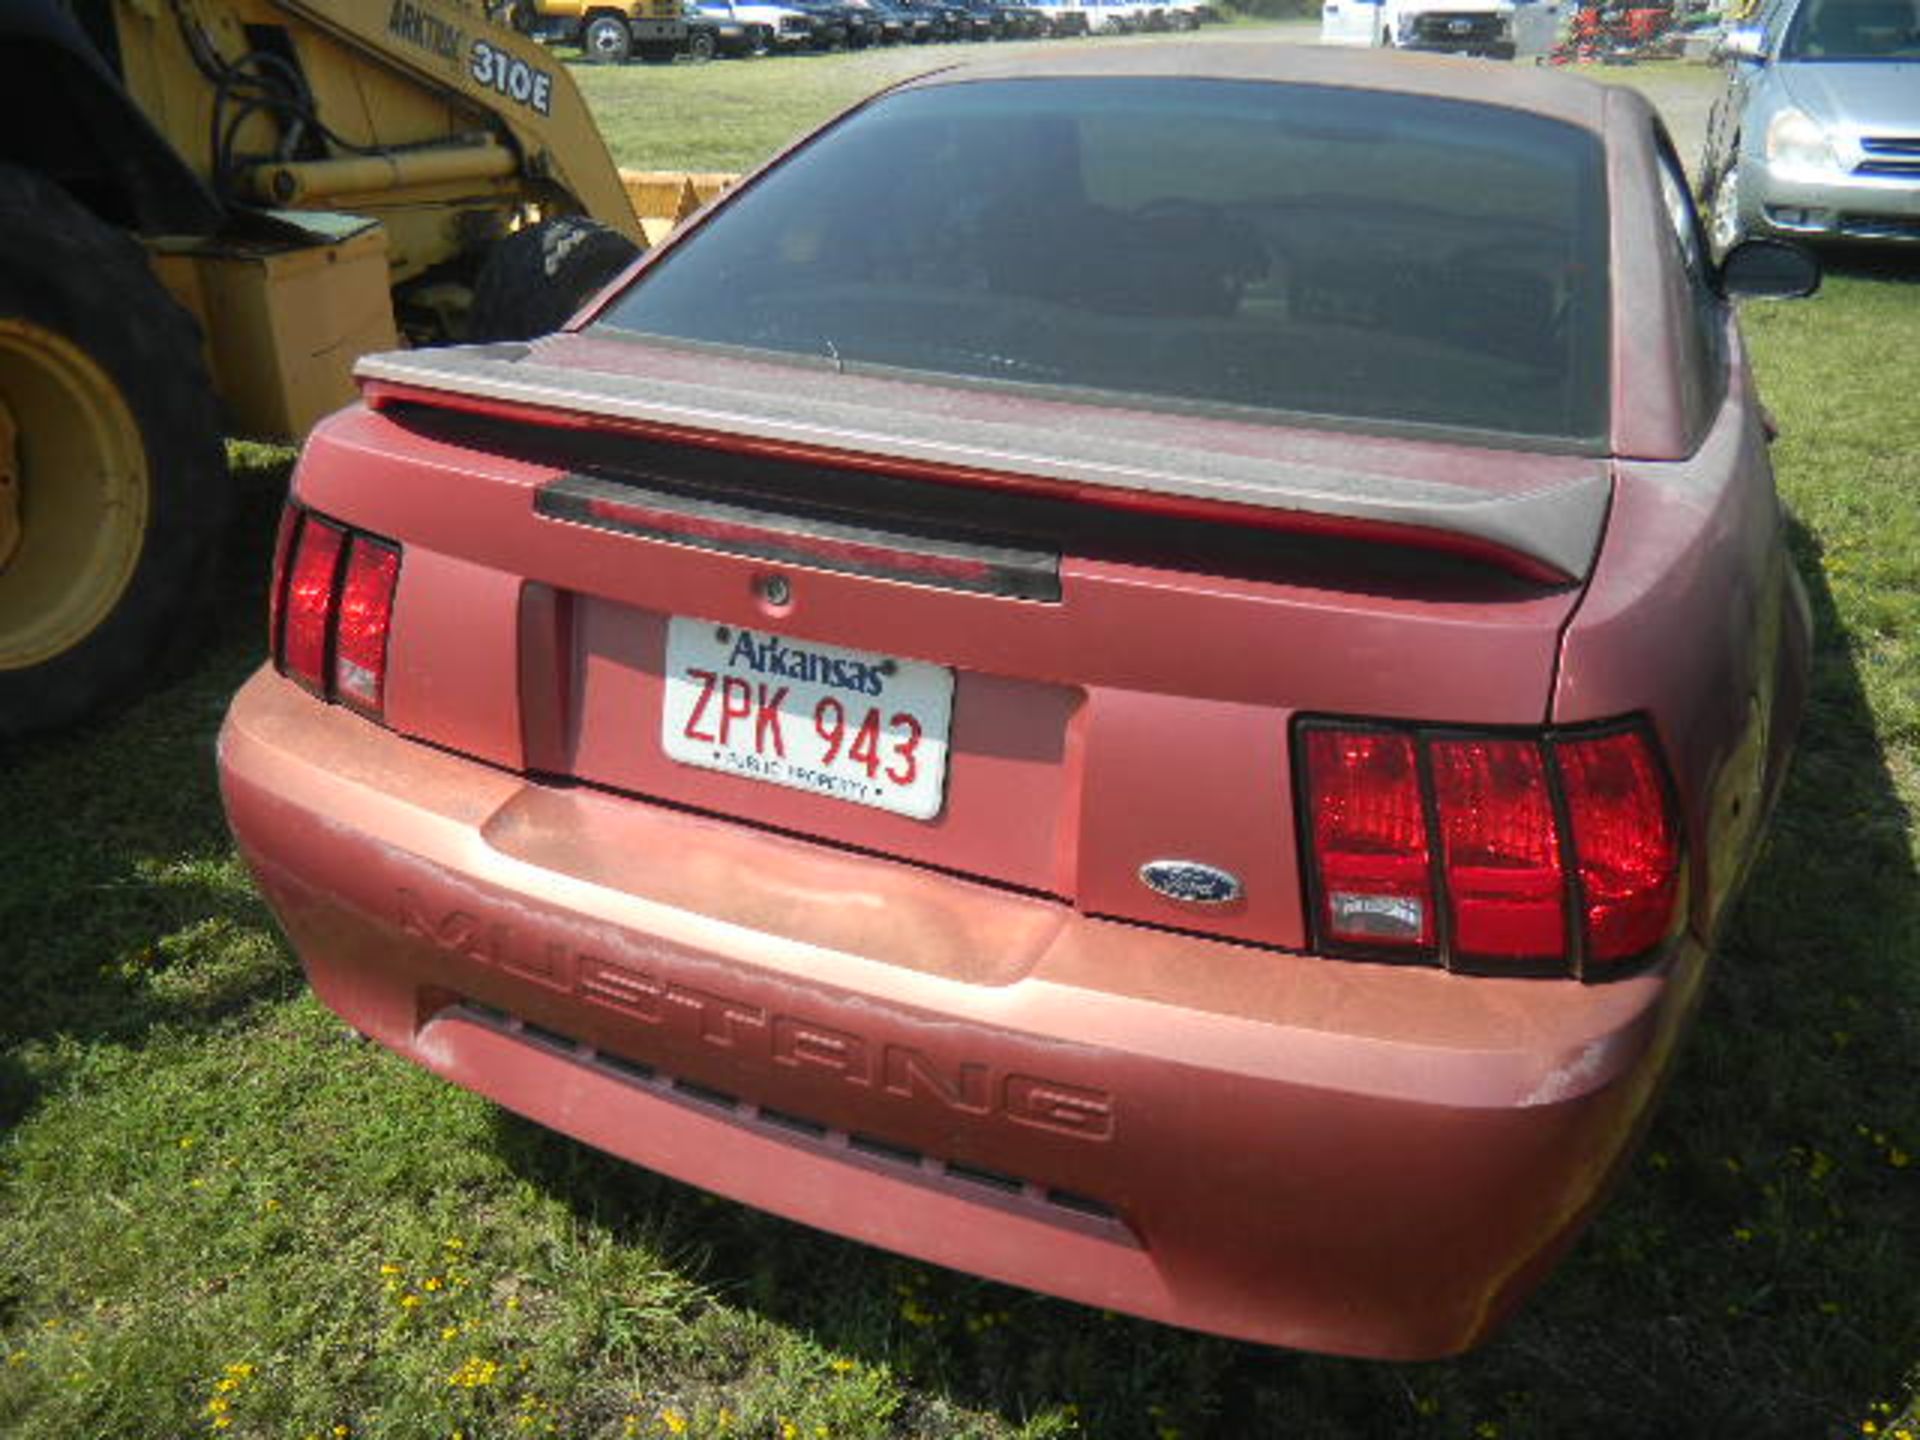 2000 Ford Mustang - 96,000 Mi. - Condition Fair - Bad Exterior Paint - Image 2 of 5